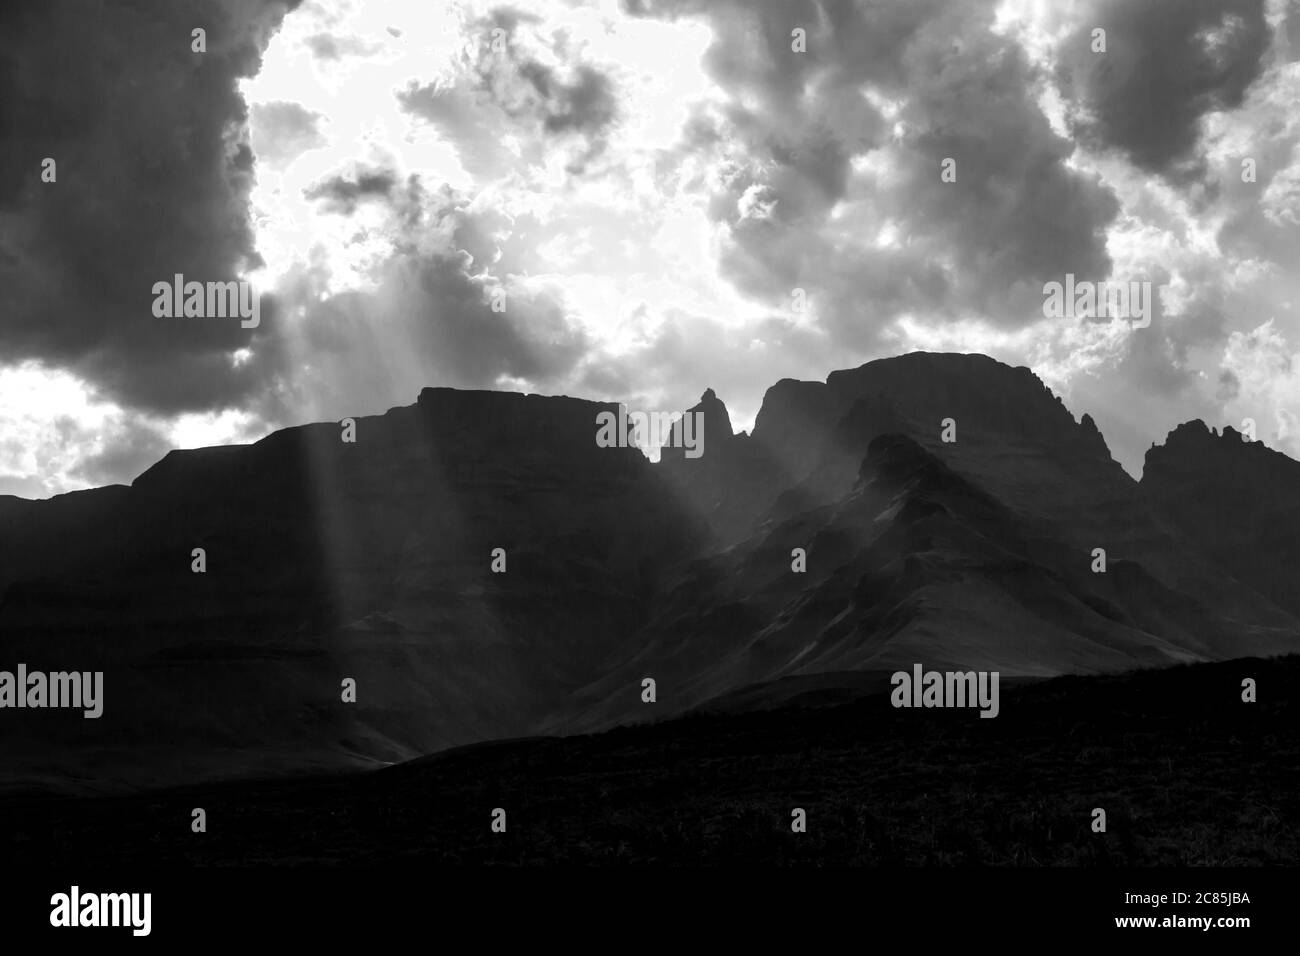 Monk’s Cowl, one of the iconic Peaks of the Drakensberg Mountains, South Africa, in monochrome Stock Photo